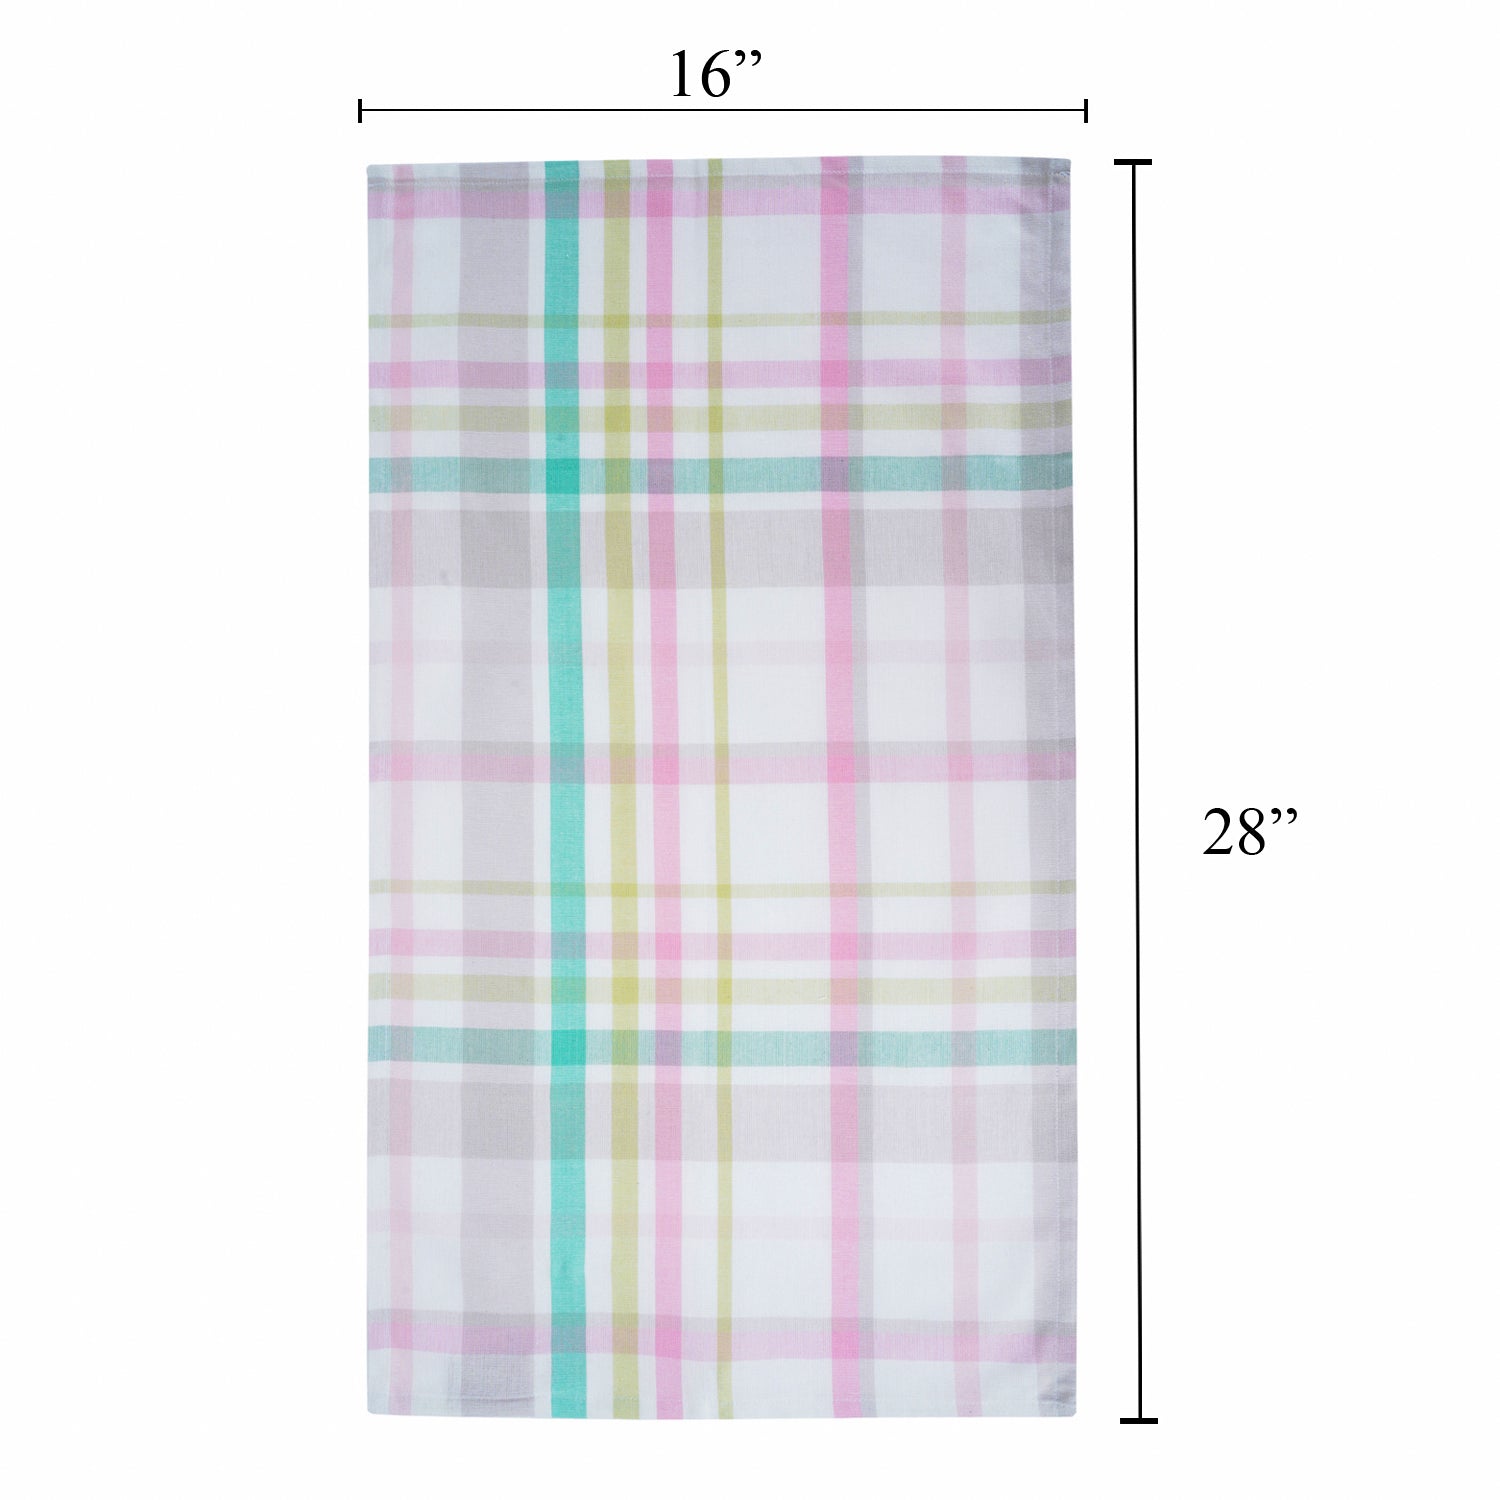 Swaas 100% Cotton Pink Floral and Checked Kitchen Towel - Pink - Set of 6 - hfnl!fe